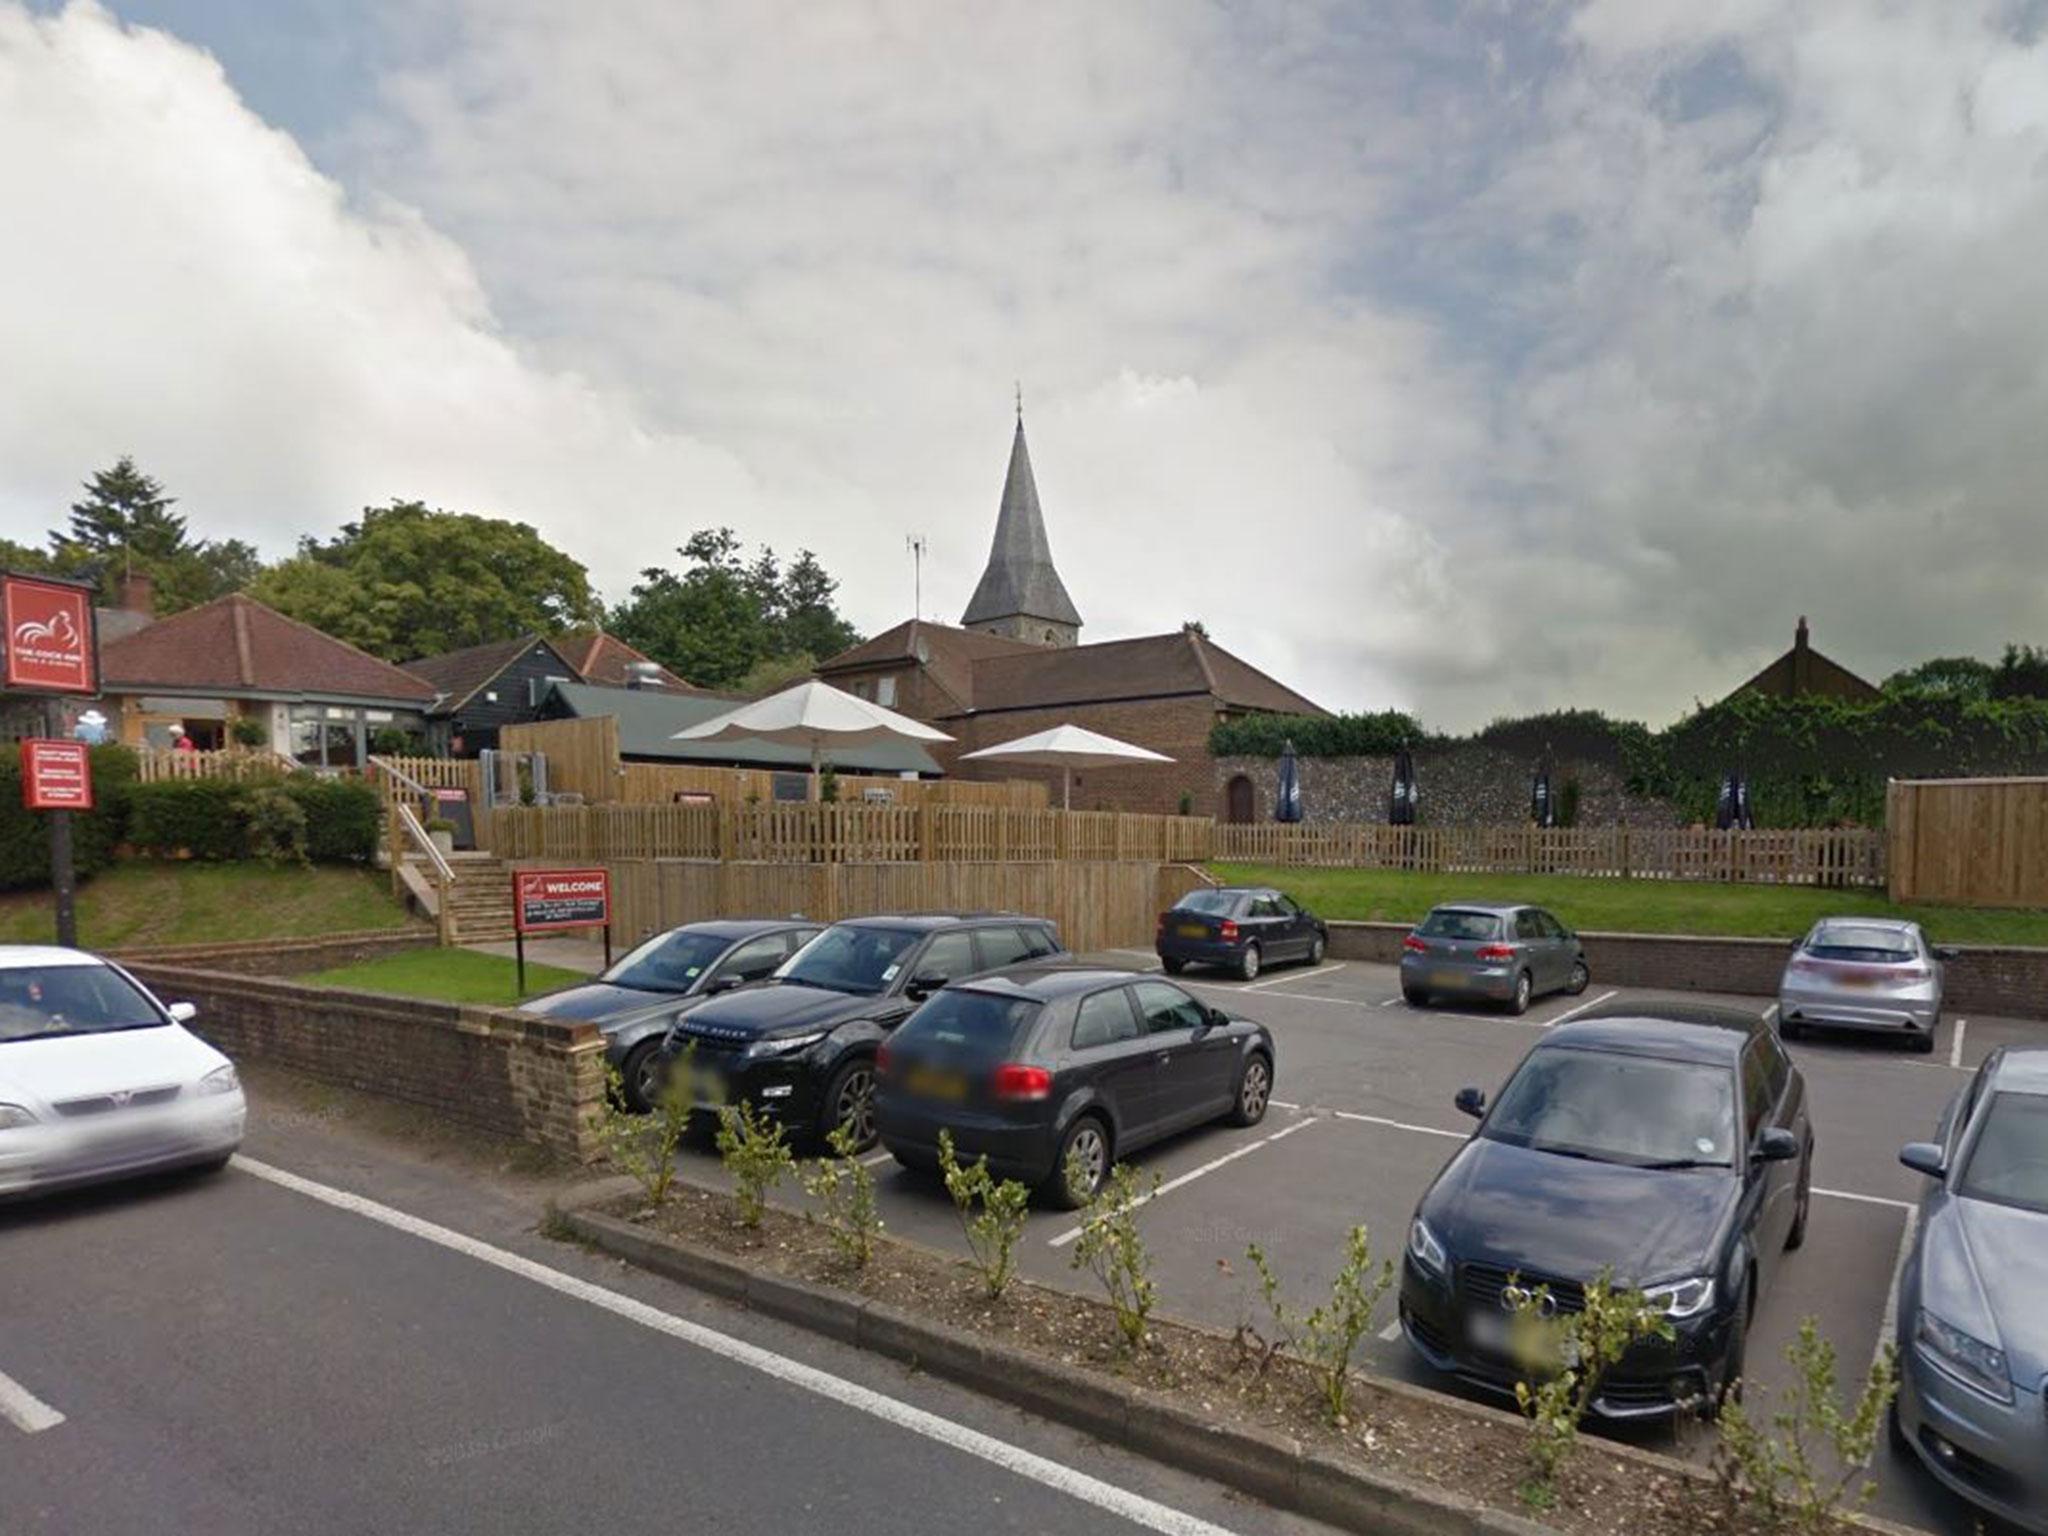 A 34-year-old man died after a disturbance at a party in the village of Headley